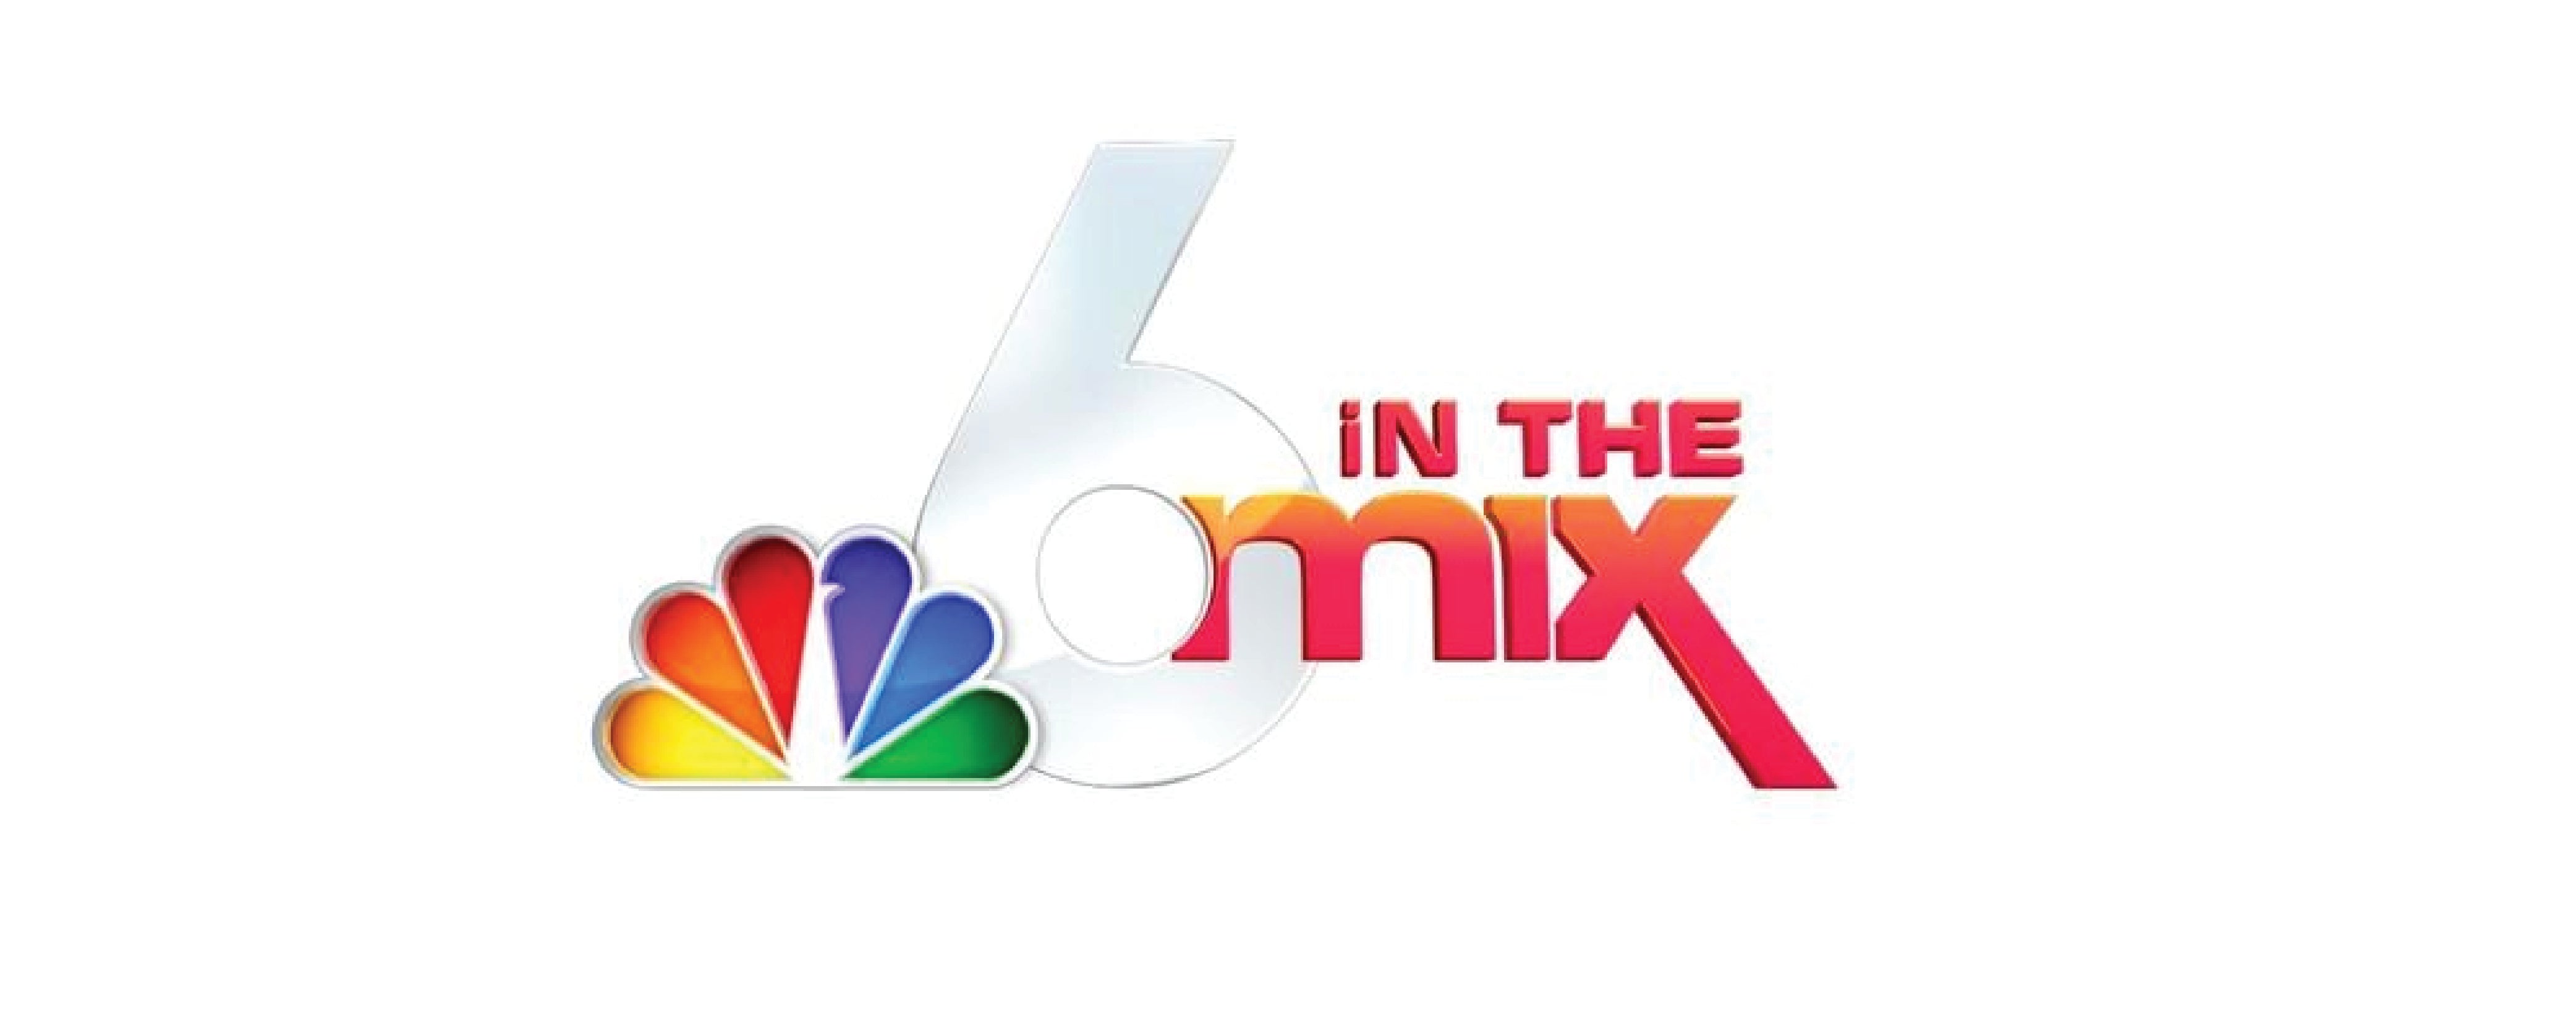 Featured on NBC 6's "6 in the Mix'